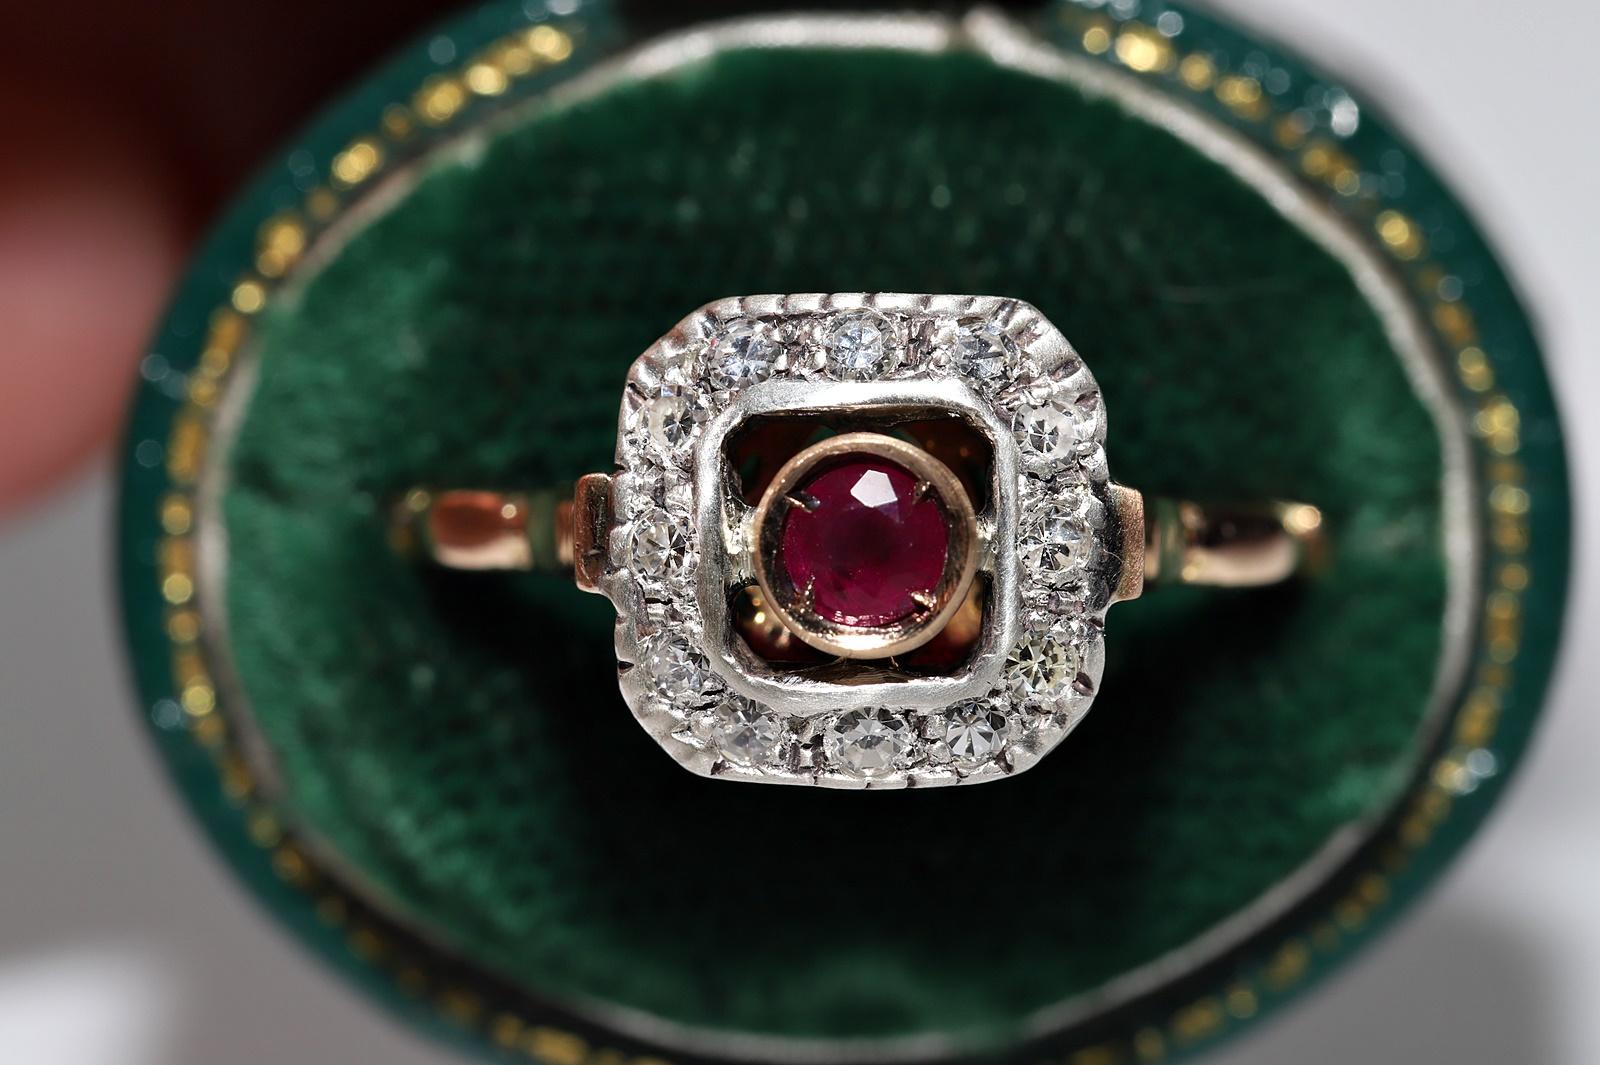 In very good condition.
Total weight is 4.3 grams.
Totally is diamond 0.26 ct.
The diamond is has G color and vvs-vs clarity.
Totally is ruby 0.20 ct.
Ring size is US 7.7 (We can make any size)
We offer free resizing.
Box is not included.
Please